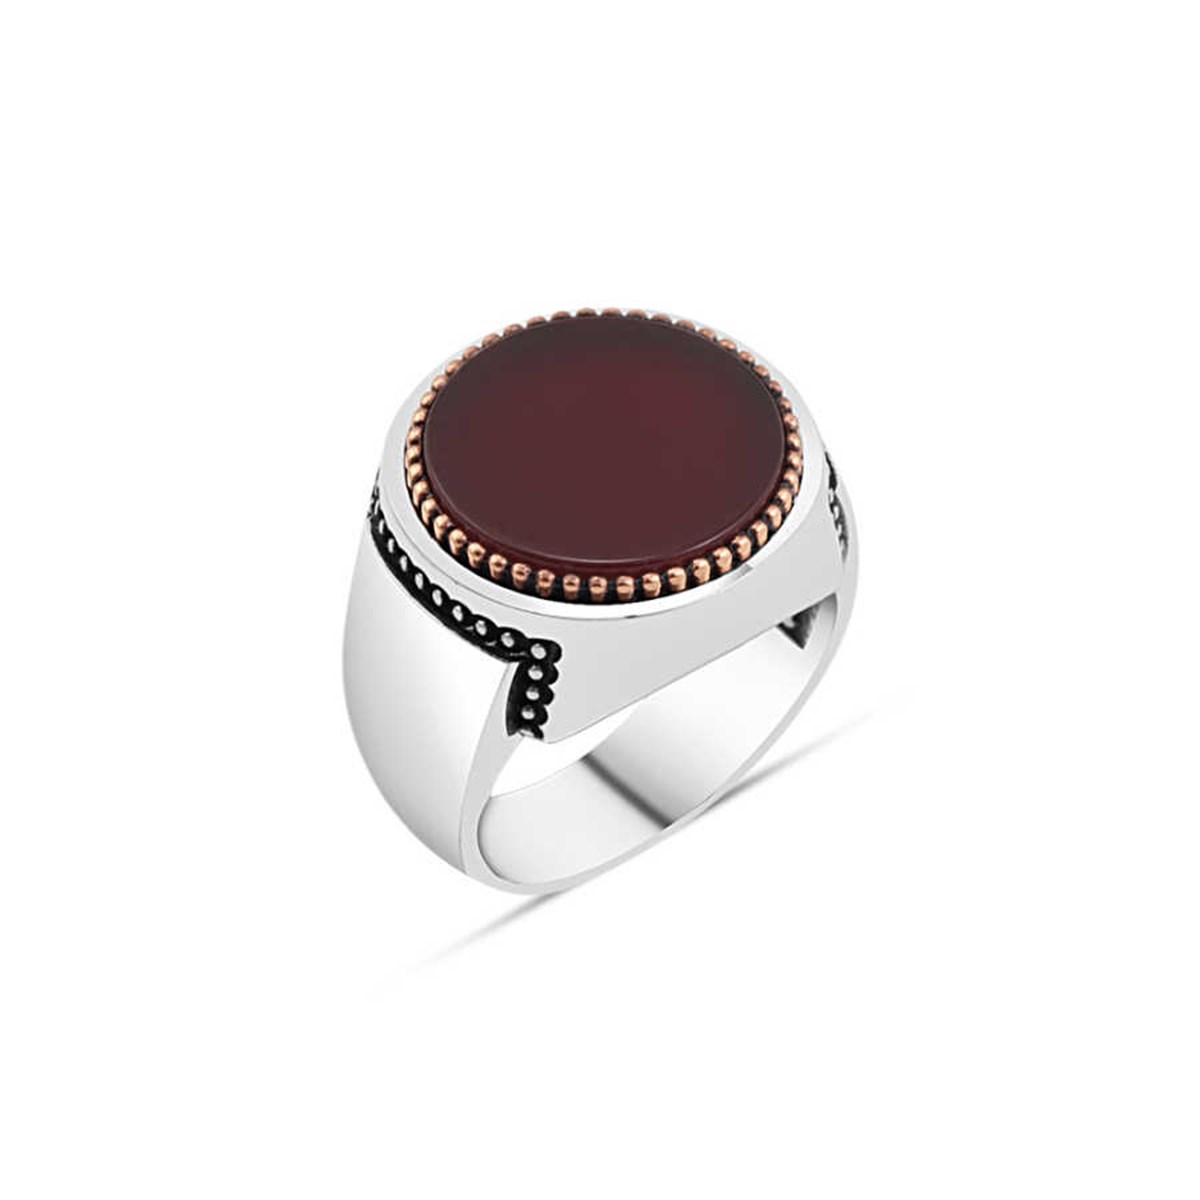 Agate Stone Silver Men's Ring